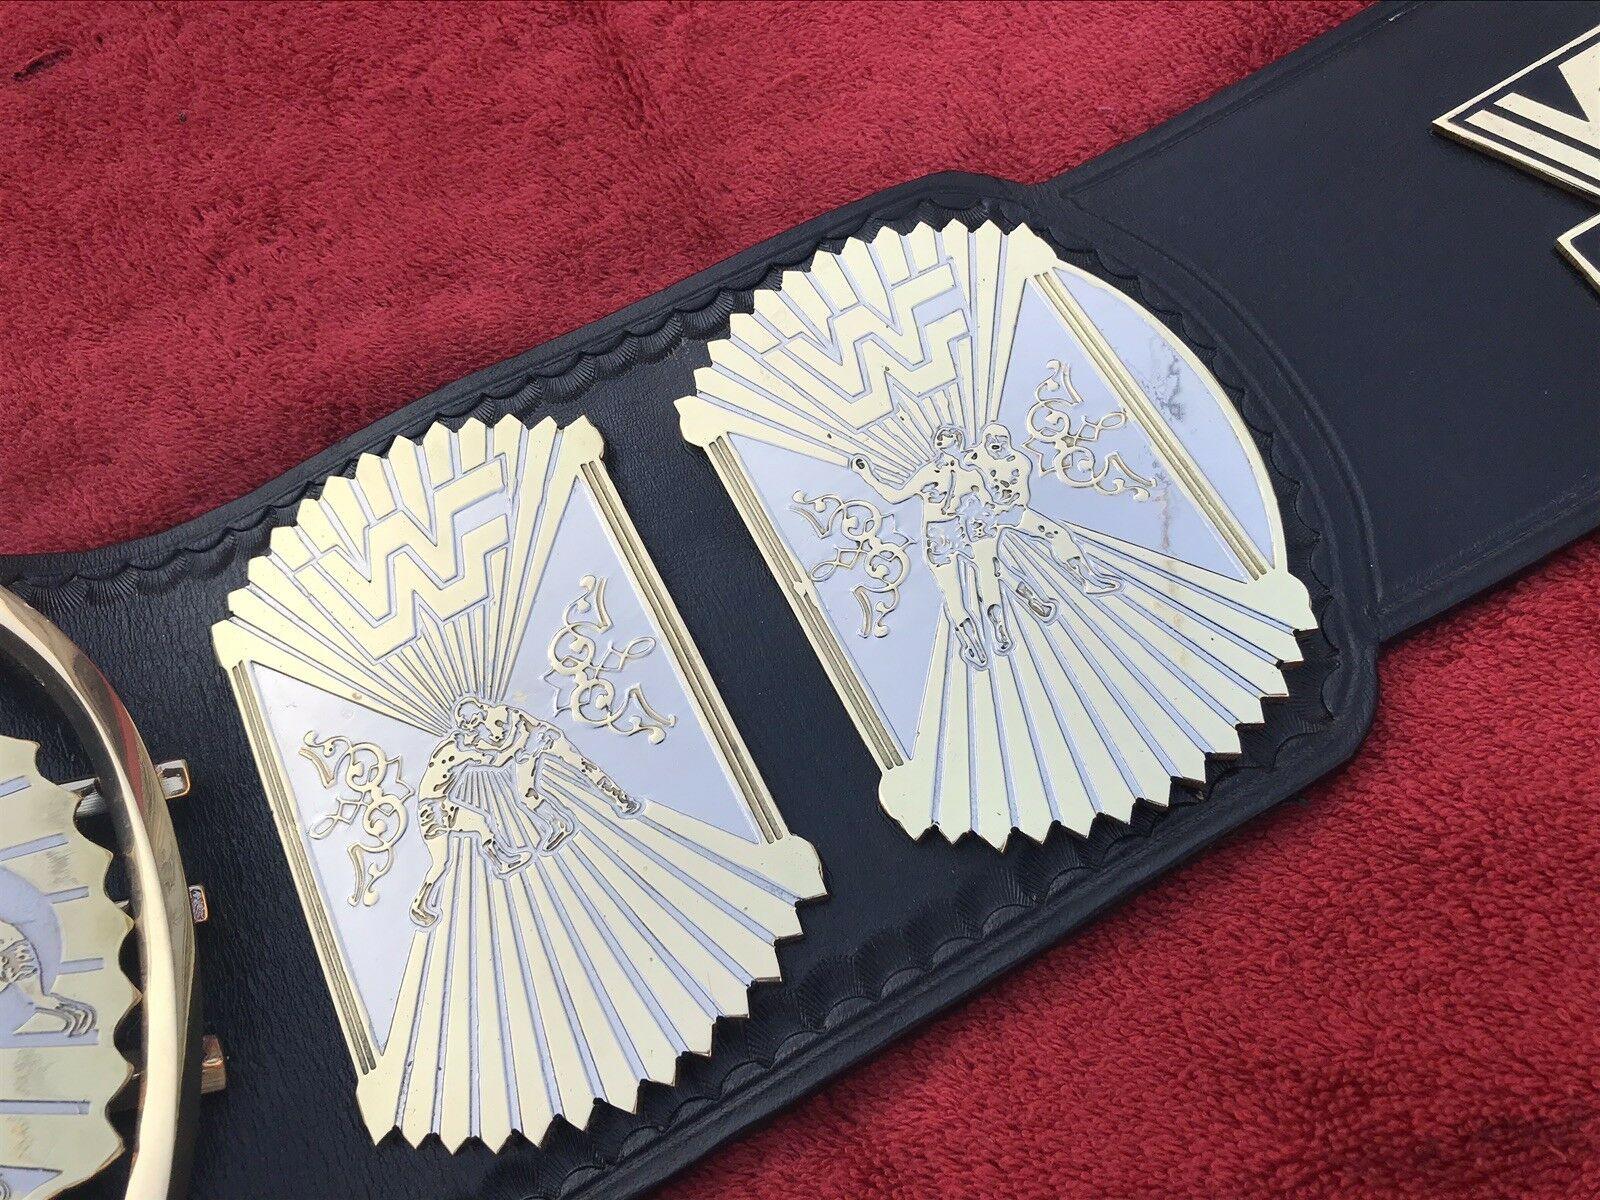 WWF WINGED EAGLE DUAL PLATED Brass Championship Title Belt